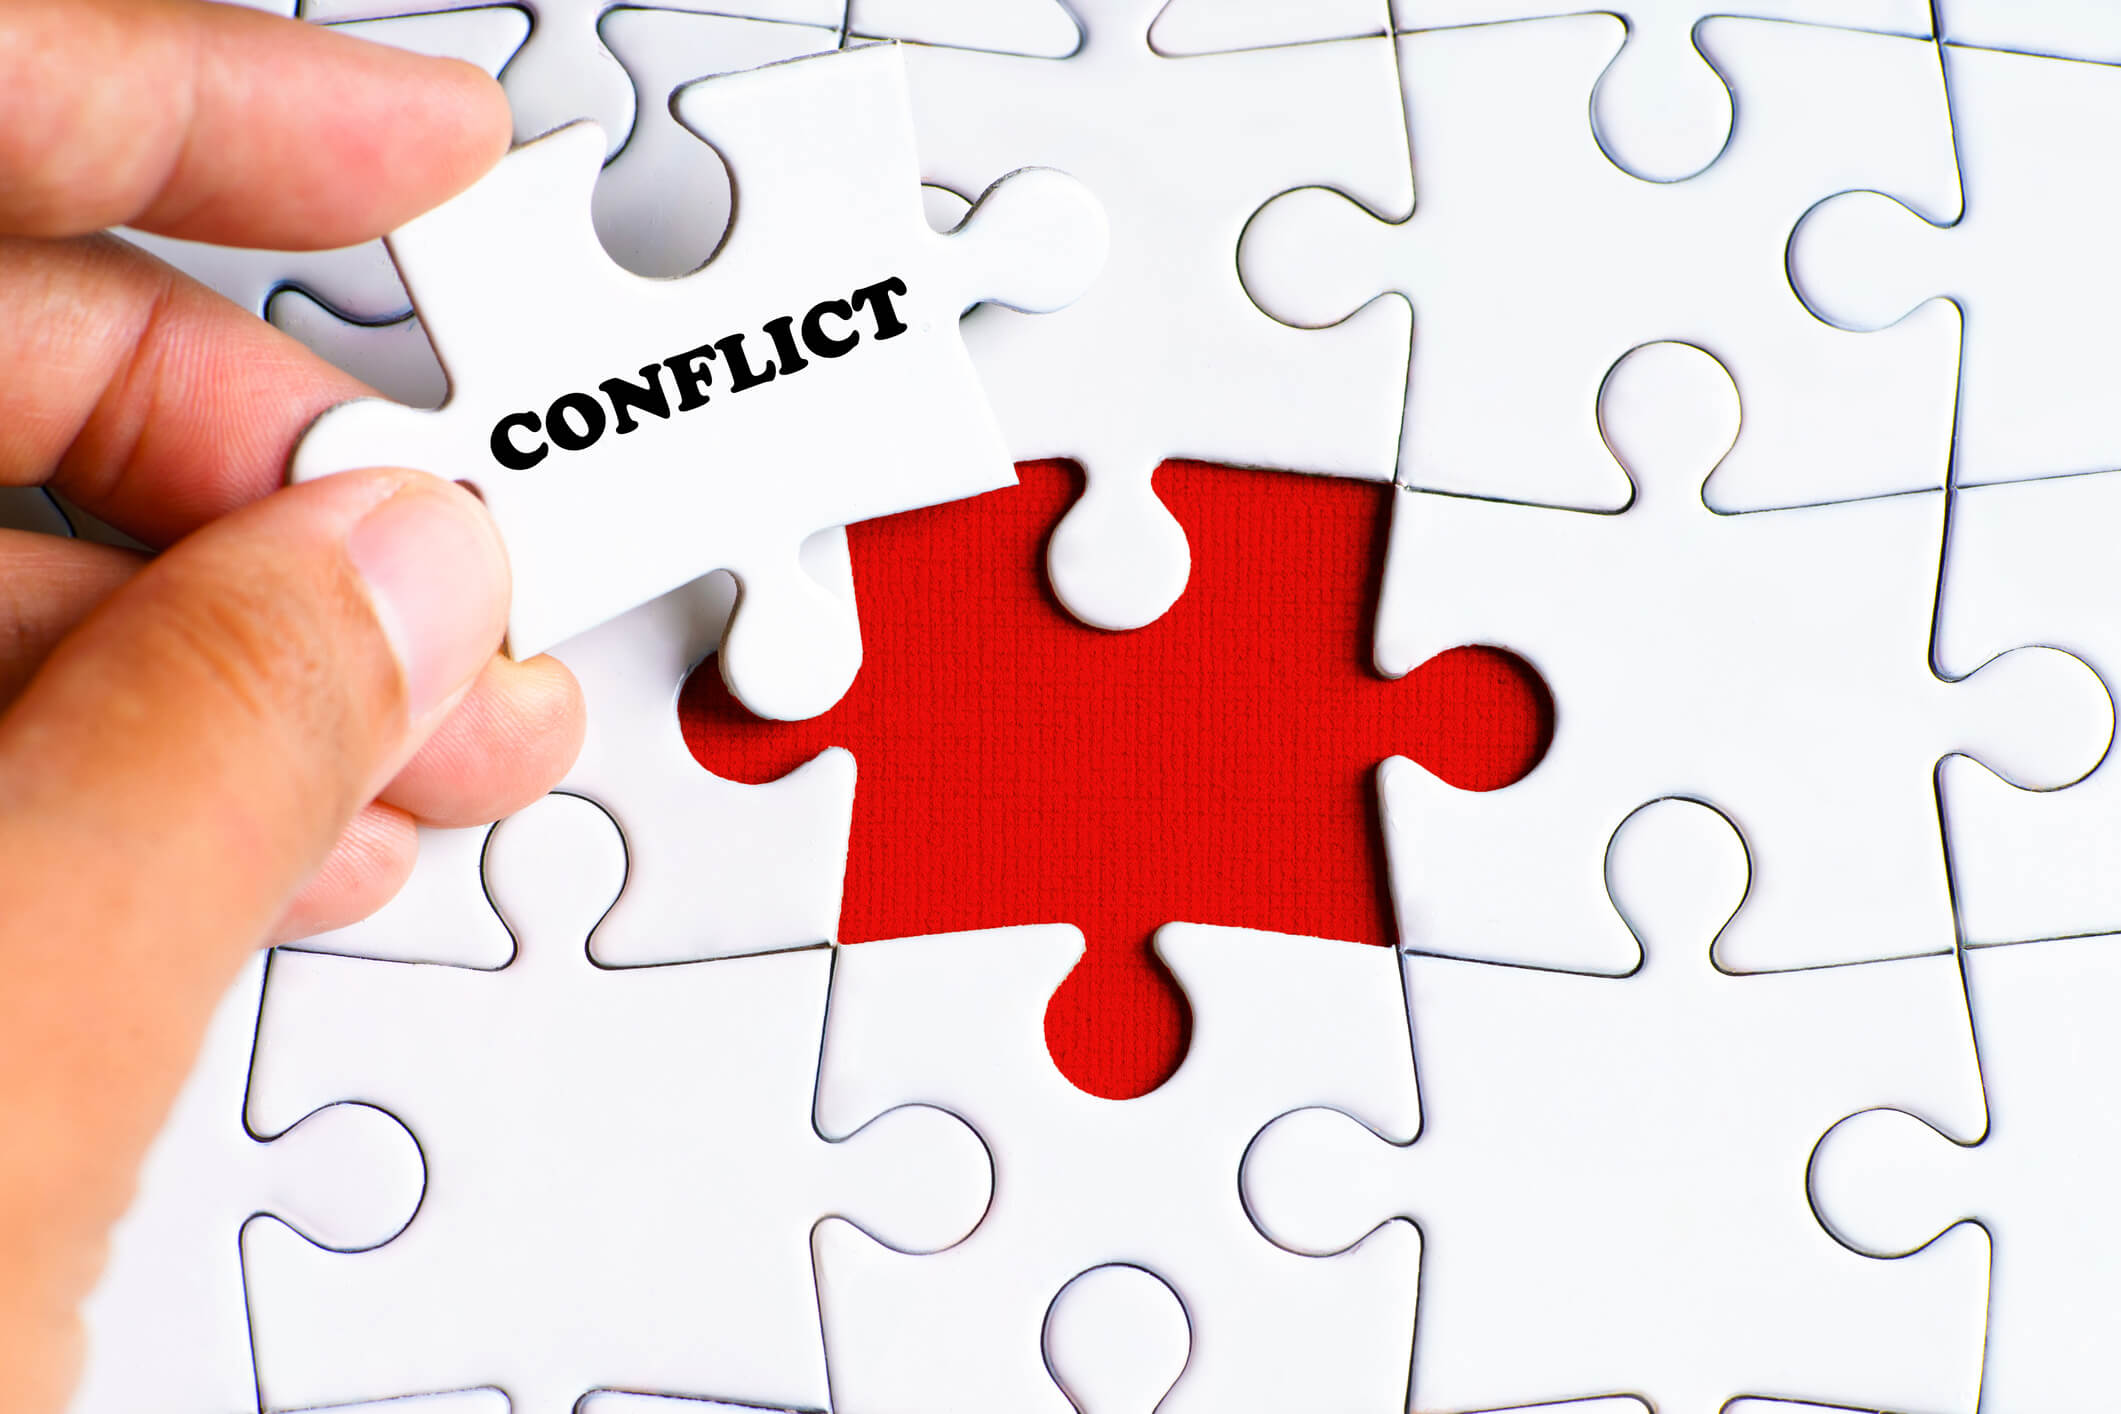 Puzzle piece that says conflict